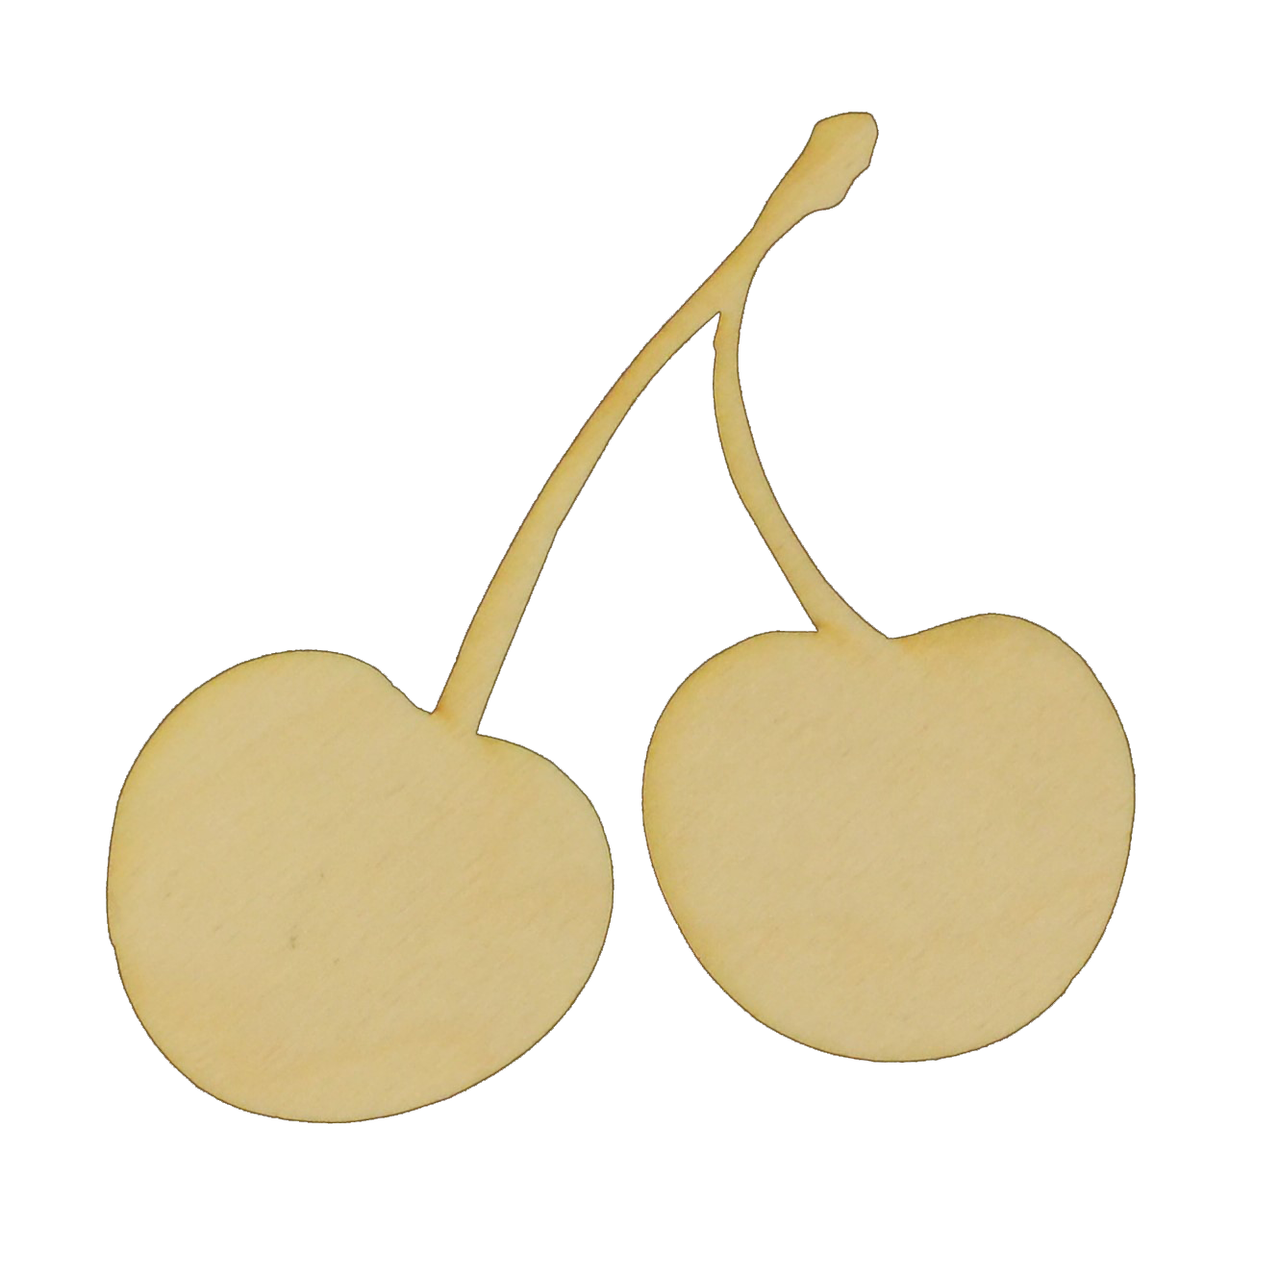 Unfinished Wooden Cherries Cutout, 12, Pack of 5 Wooden Shapes for Crafts  and Summer Decor and Crafting, by Woodpeckers